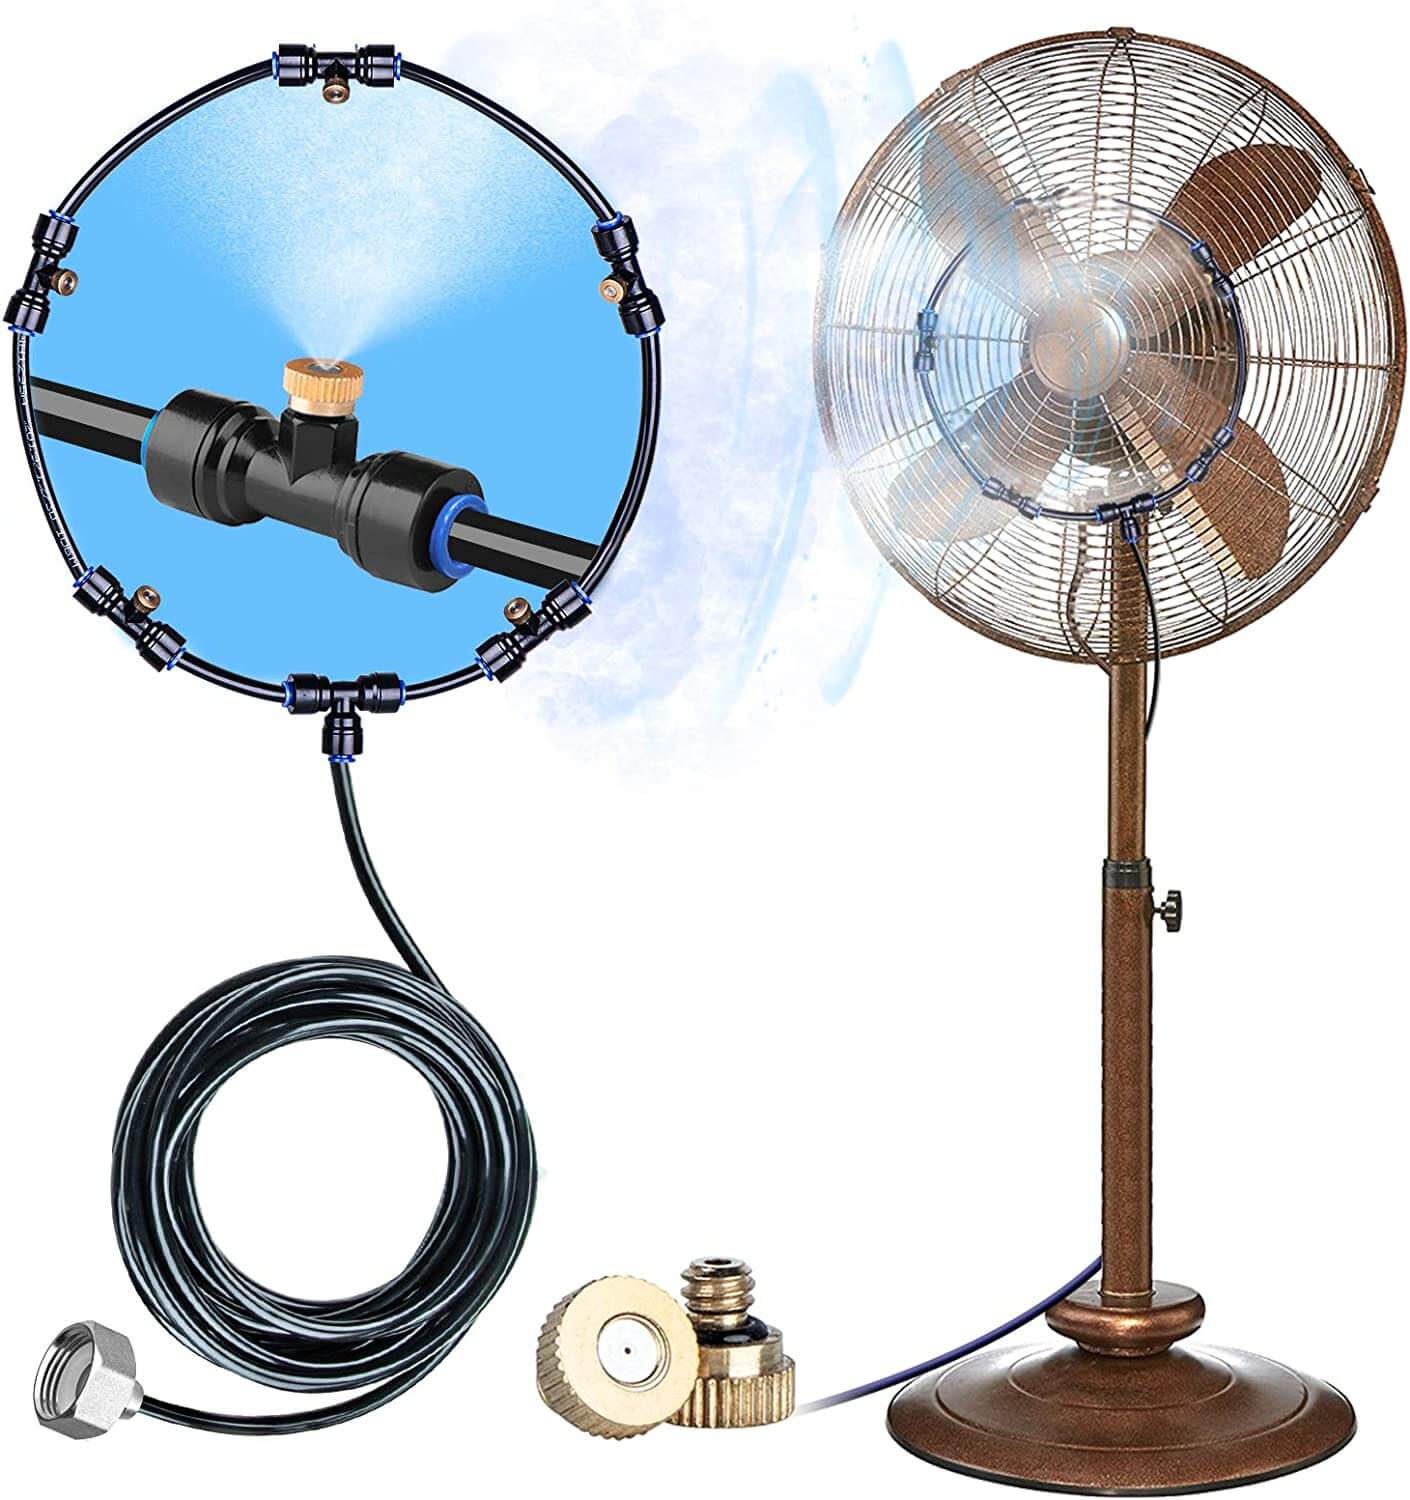 homenote Fan Misting Kit for a Cool Patio Breeze 16.4FT